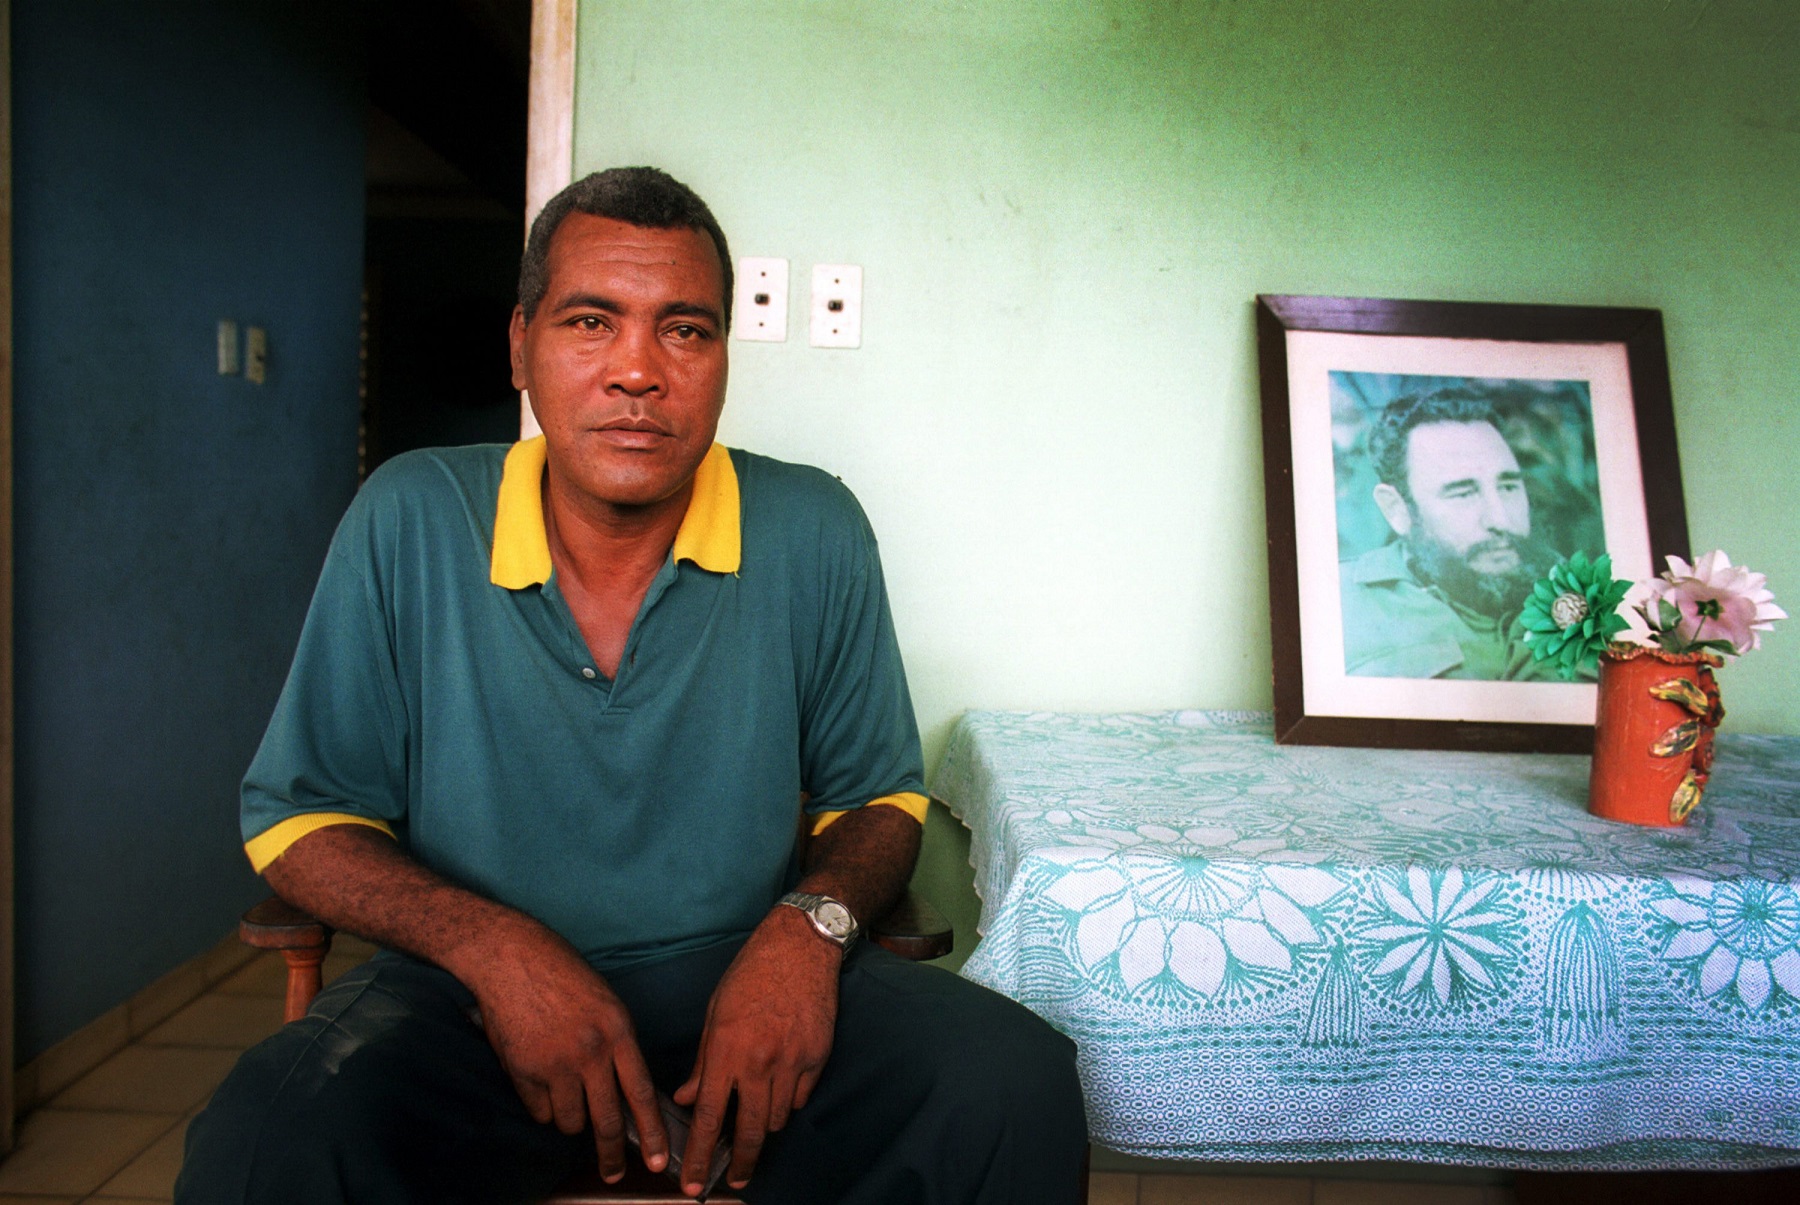 DELICIAS, CUBA - JULY 30: Cuba’s boxing legend Teofilo Stevenson sits next to a photo of Cuba’s Revolution leader Fidel Castro in his home in Delicias on July 30, 2000, in the eastern province Las Tunas, Cuba. Stevenson, who won 3 Olympic Gold medals and was 3 times World Champion, died of heart attack at the age of 60 on June 11, 2012, in Havana, Cuba. (Photo by Sven Creutzmann/Mambo photo/Getty Images)